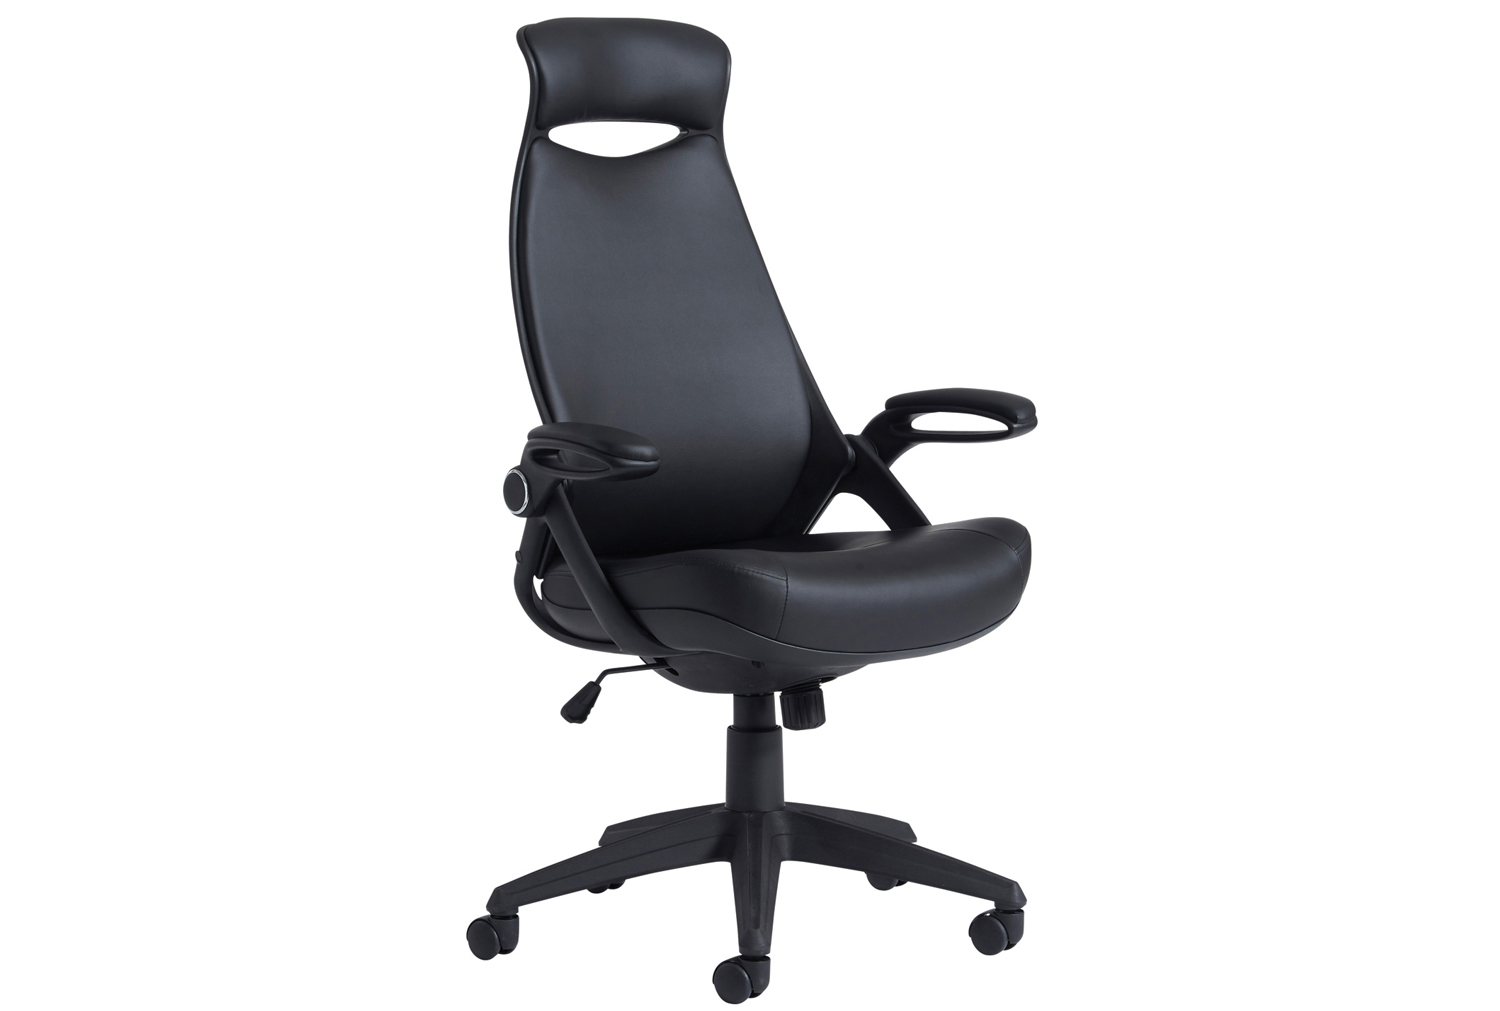 Roche Leather High Back Managers Office Chair With Headrest, Black, Express Delivery